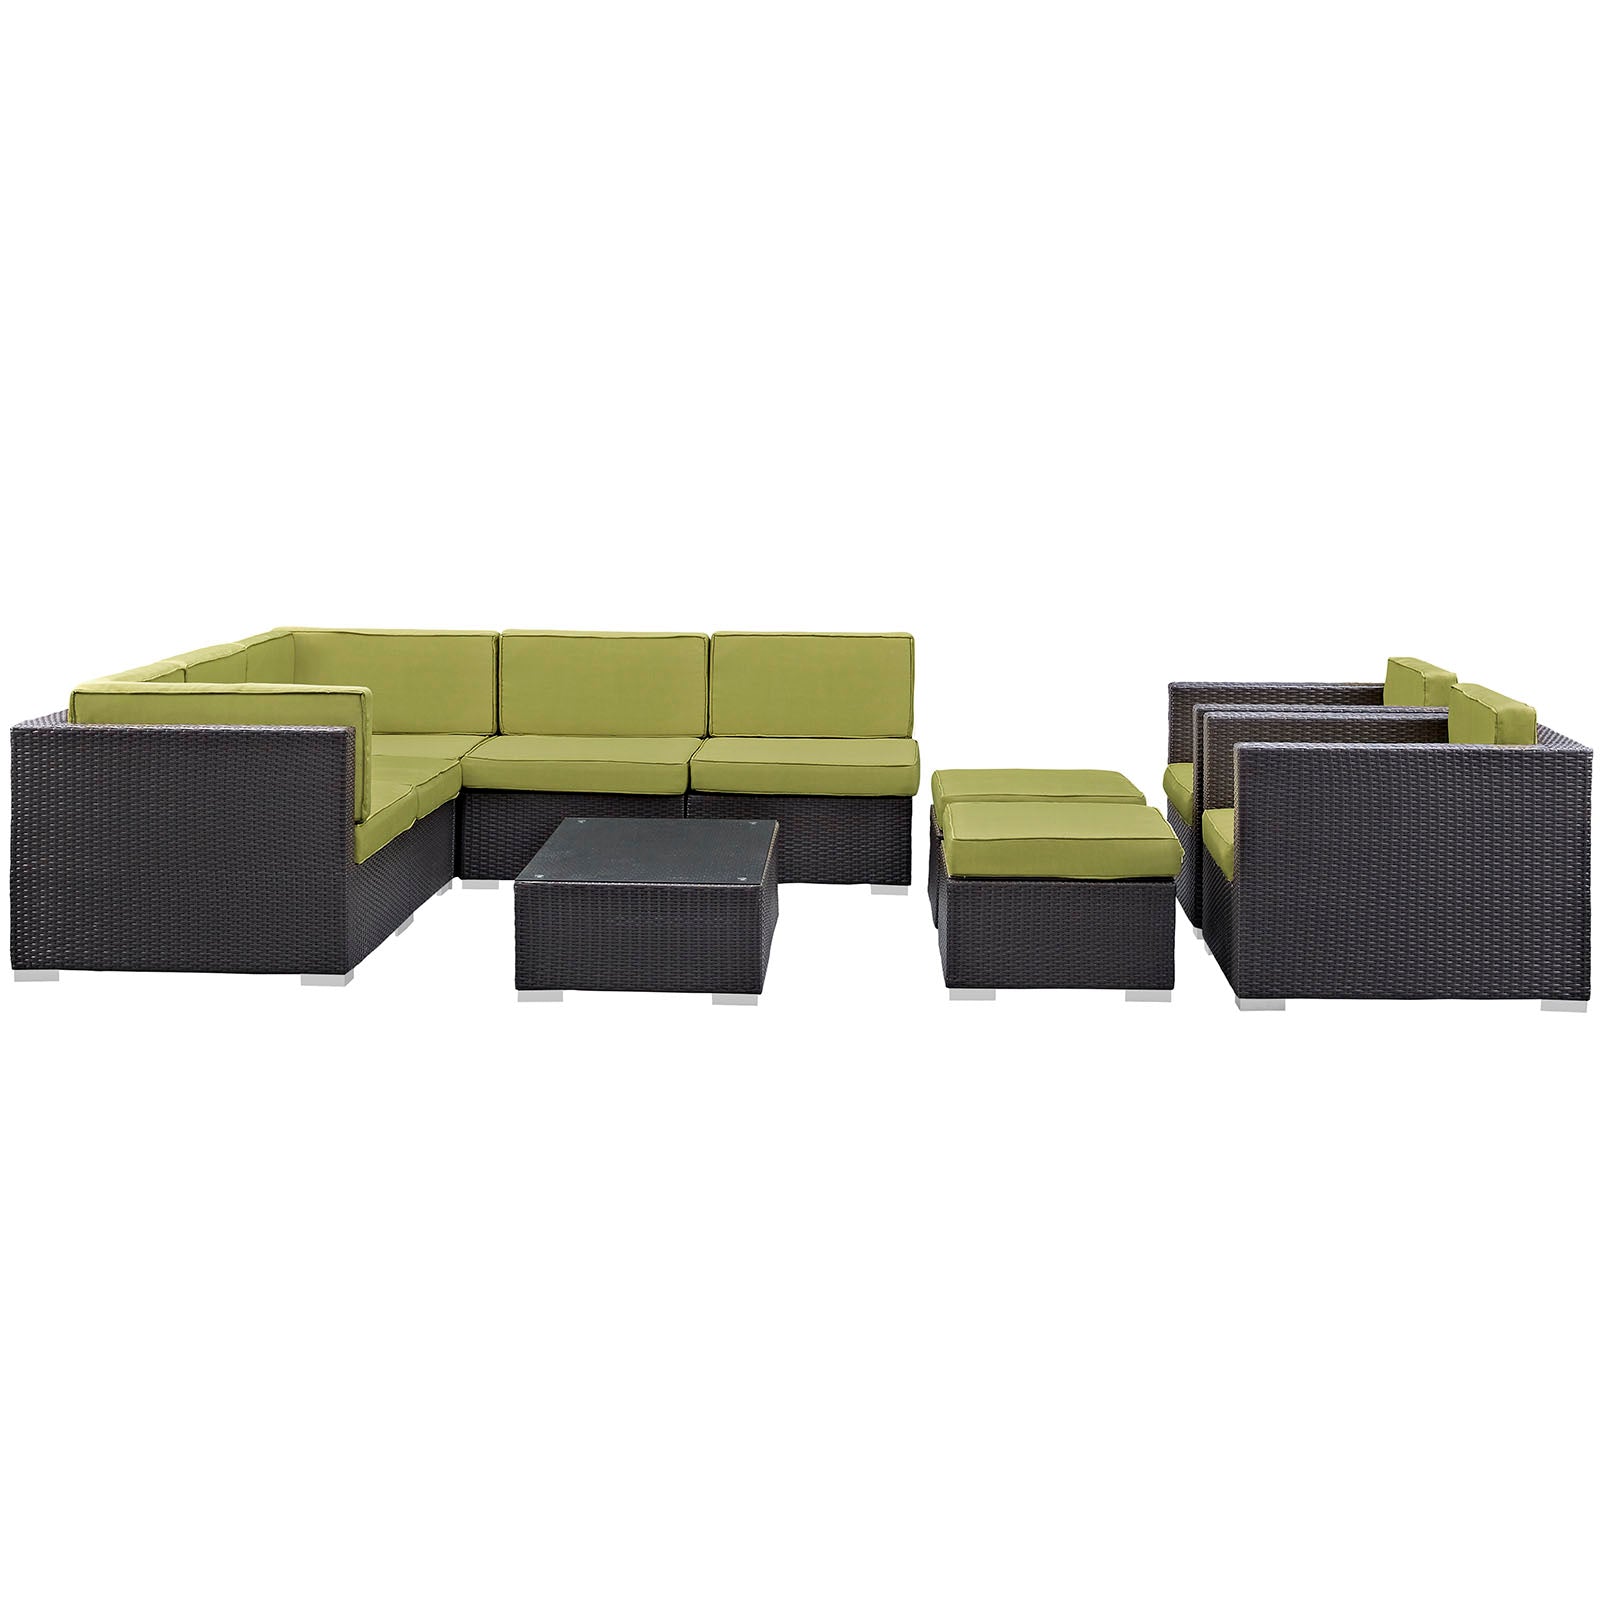 Avia 10 Piece Outdoor Patio Sectional Set-Outdoor Set-Modway-Wall2Wall Furnishings